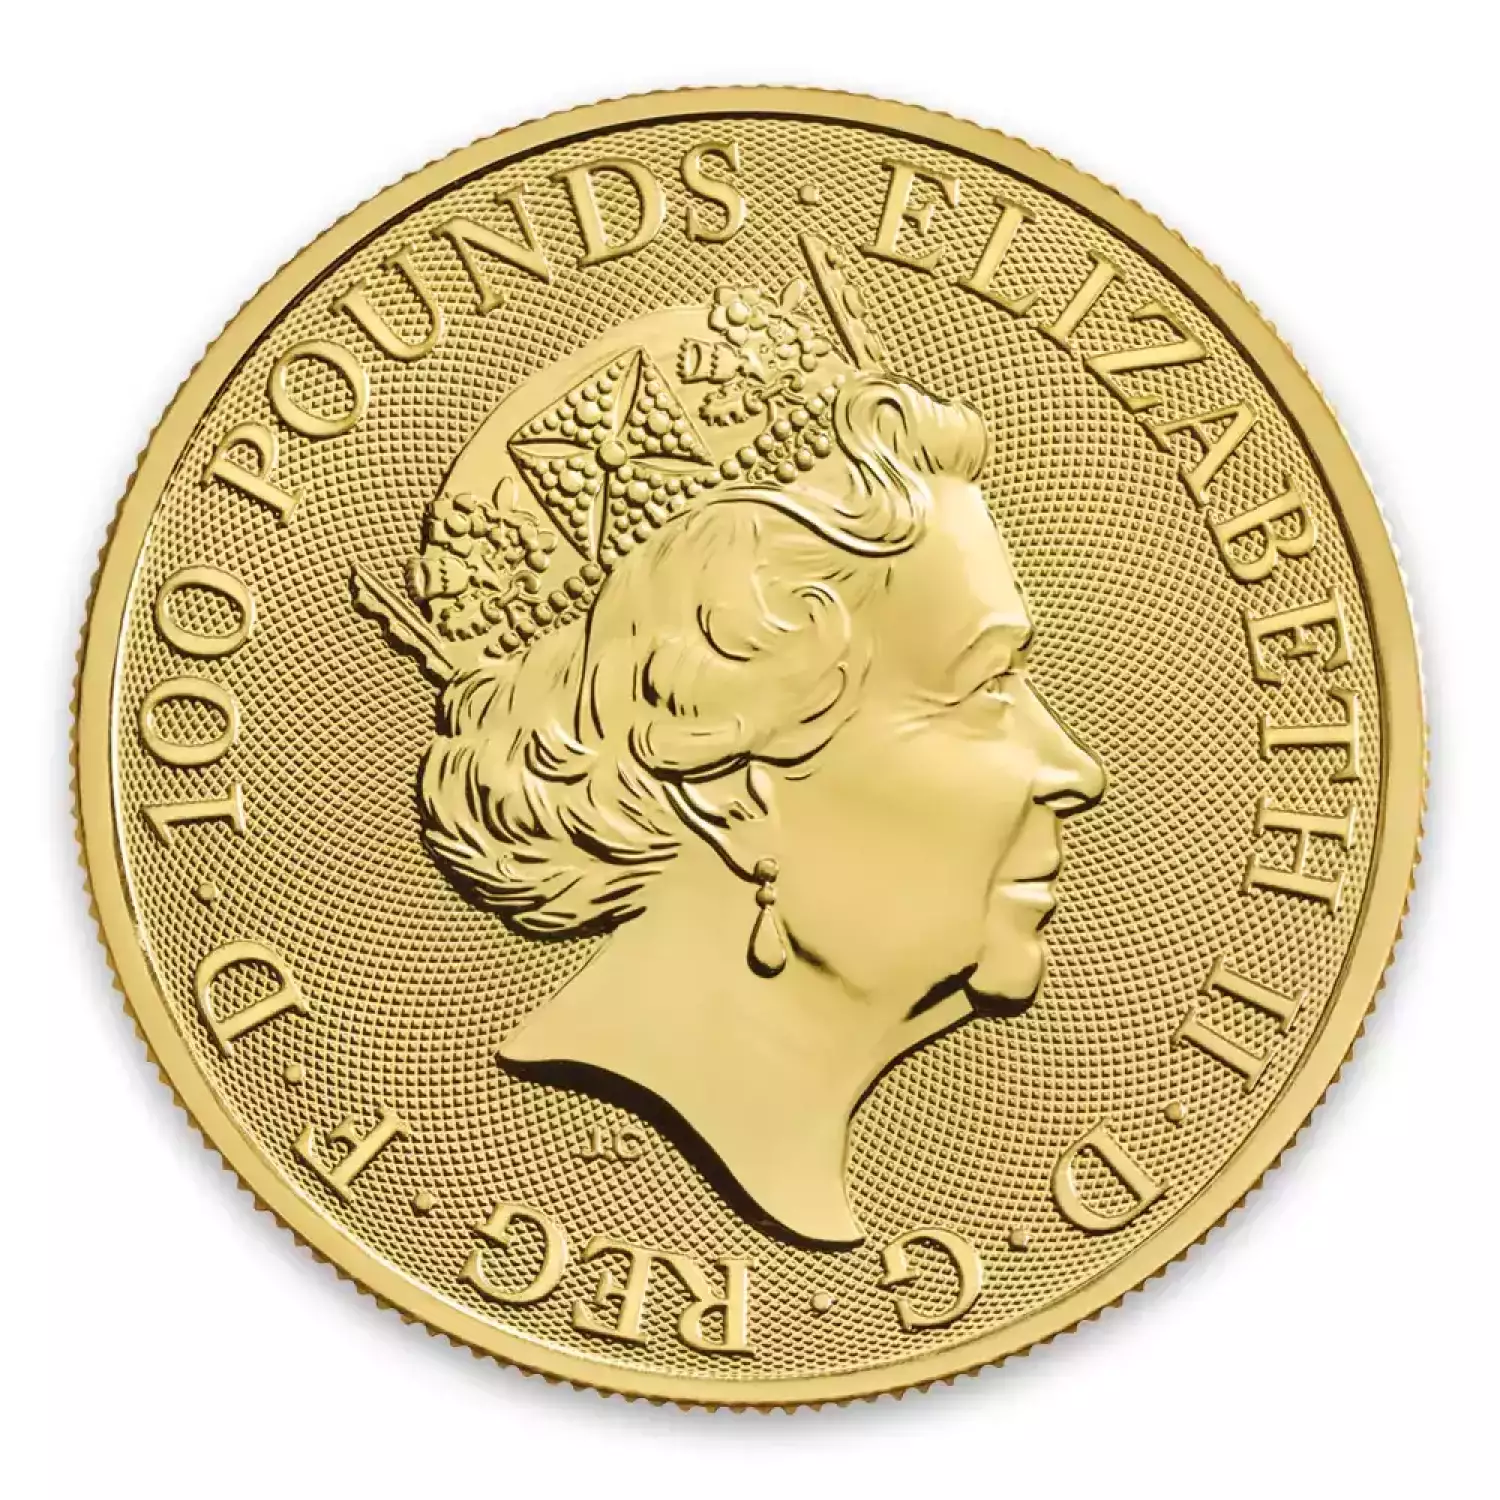 2020 1oz Gold Britain Queen's Beast - The White Horse of Hanover (3)